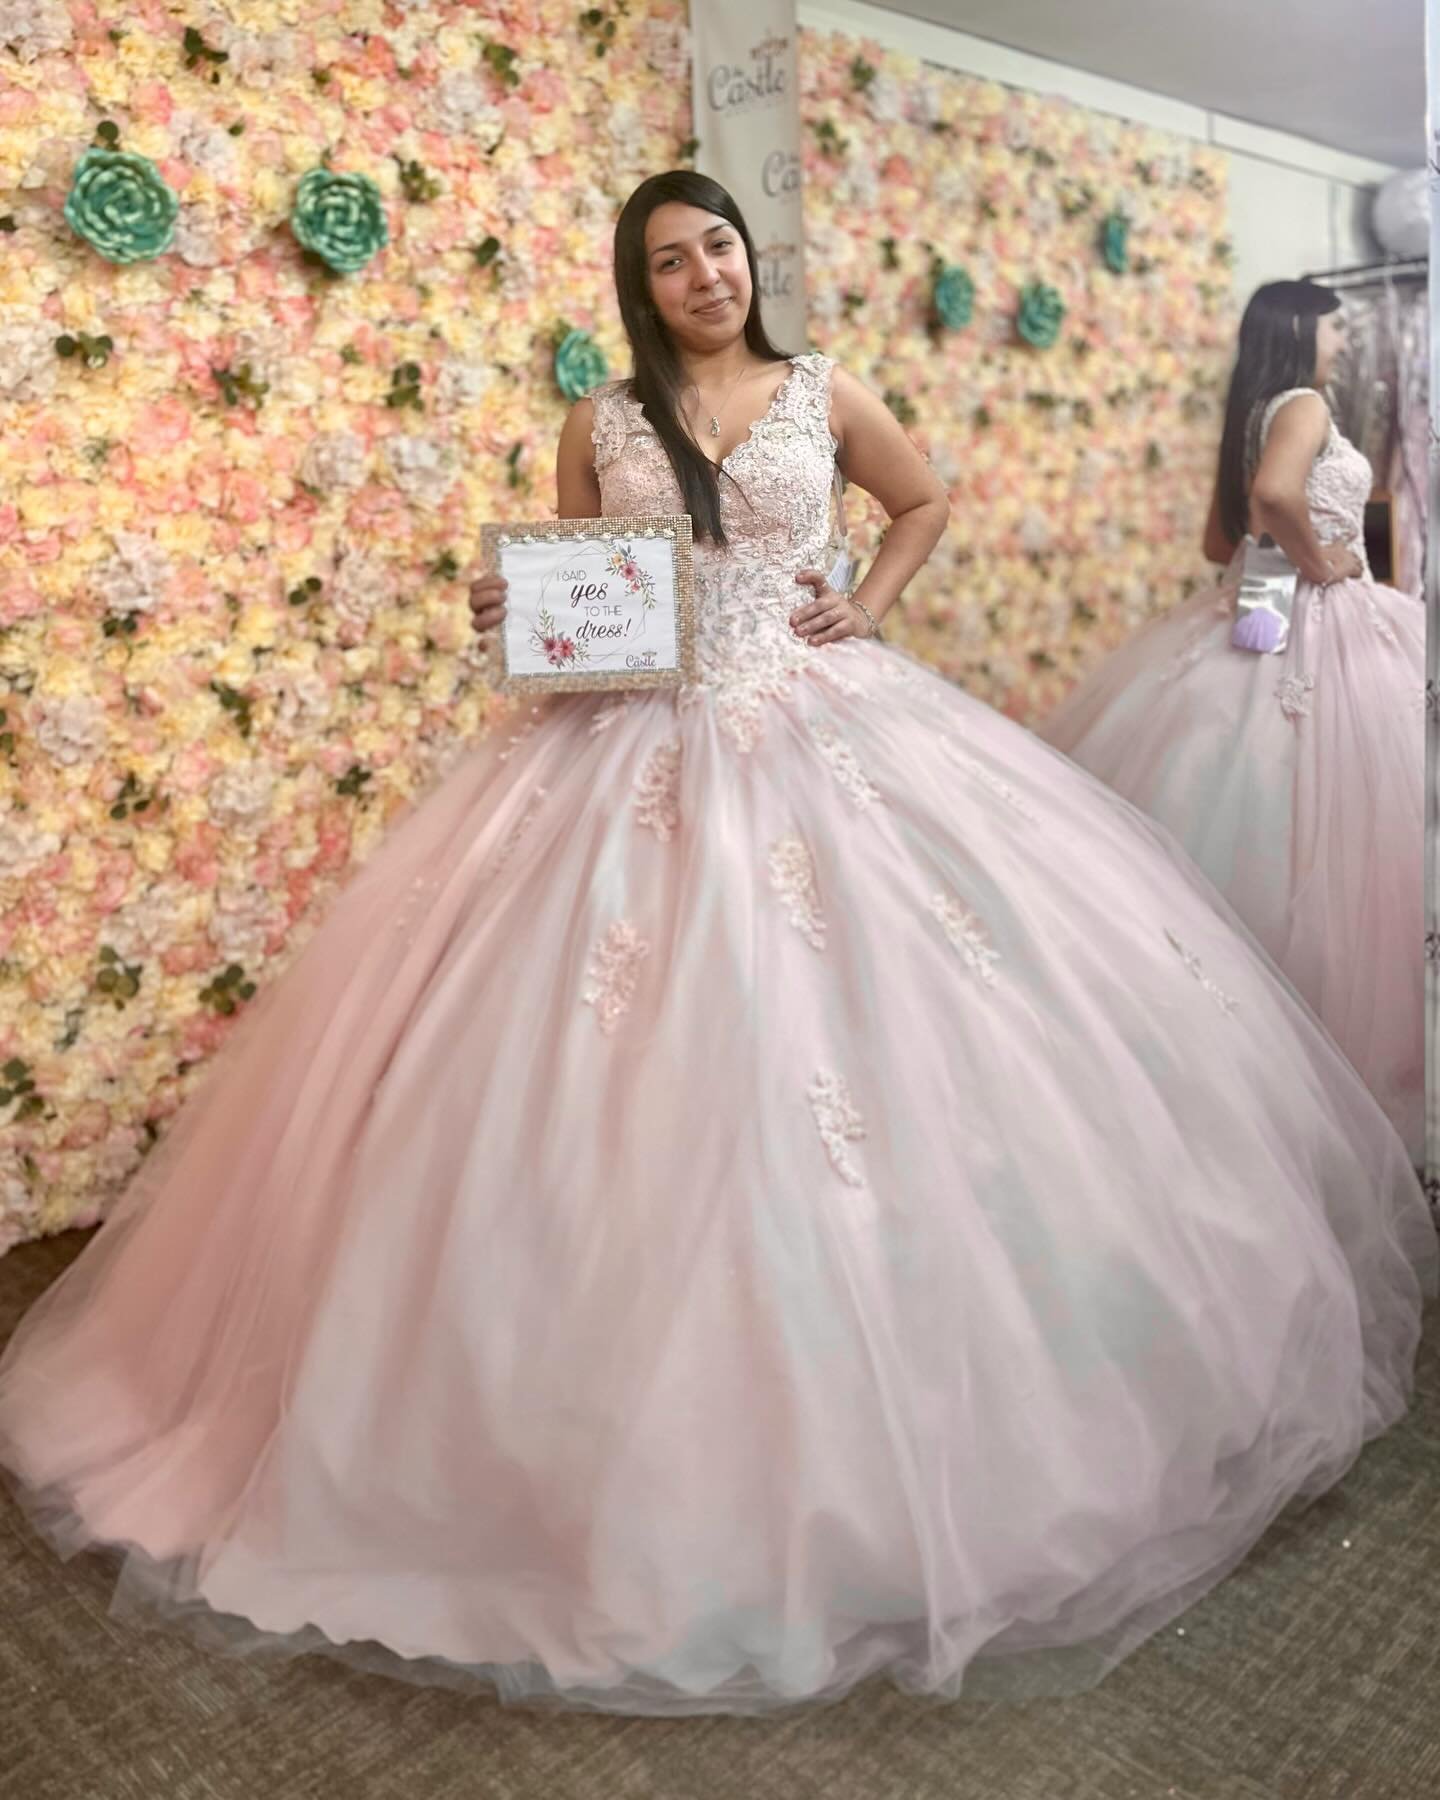 She said yes to her dress! 💖💕
✨
✨✨
✨✨✨
✨✨✨✨
✨✨✨✨✨
✨✨✨✨
✨✨✨
✨✨
✨
#mycastleboutique #pearland #pearlandtx #quincea&ntilde;era #quinceanera #quince #ballgown #sweet15 #dresses #partydress #vestidosdequince #xv #prom #dress #quinceaneradress #quincea&n